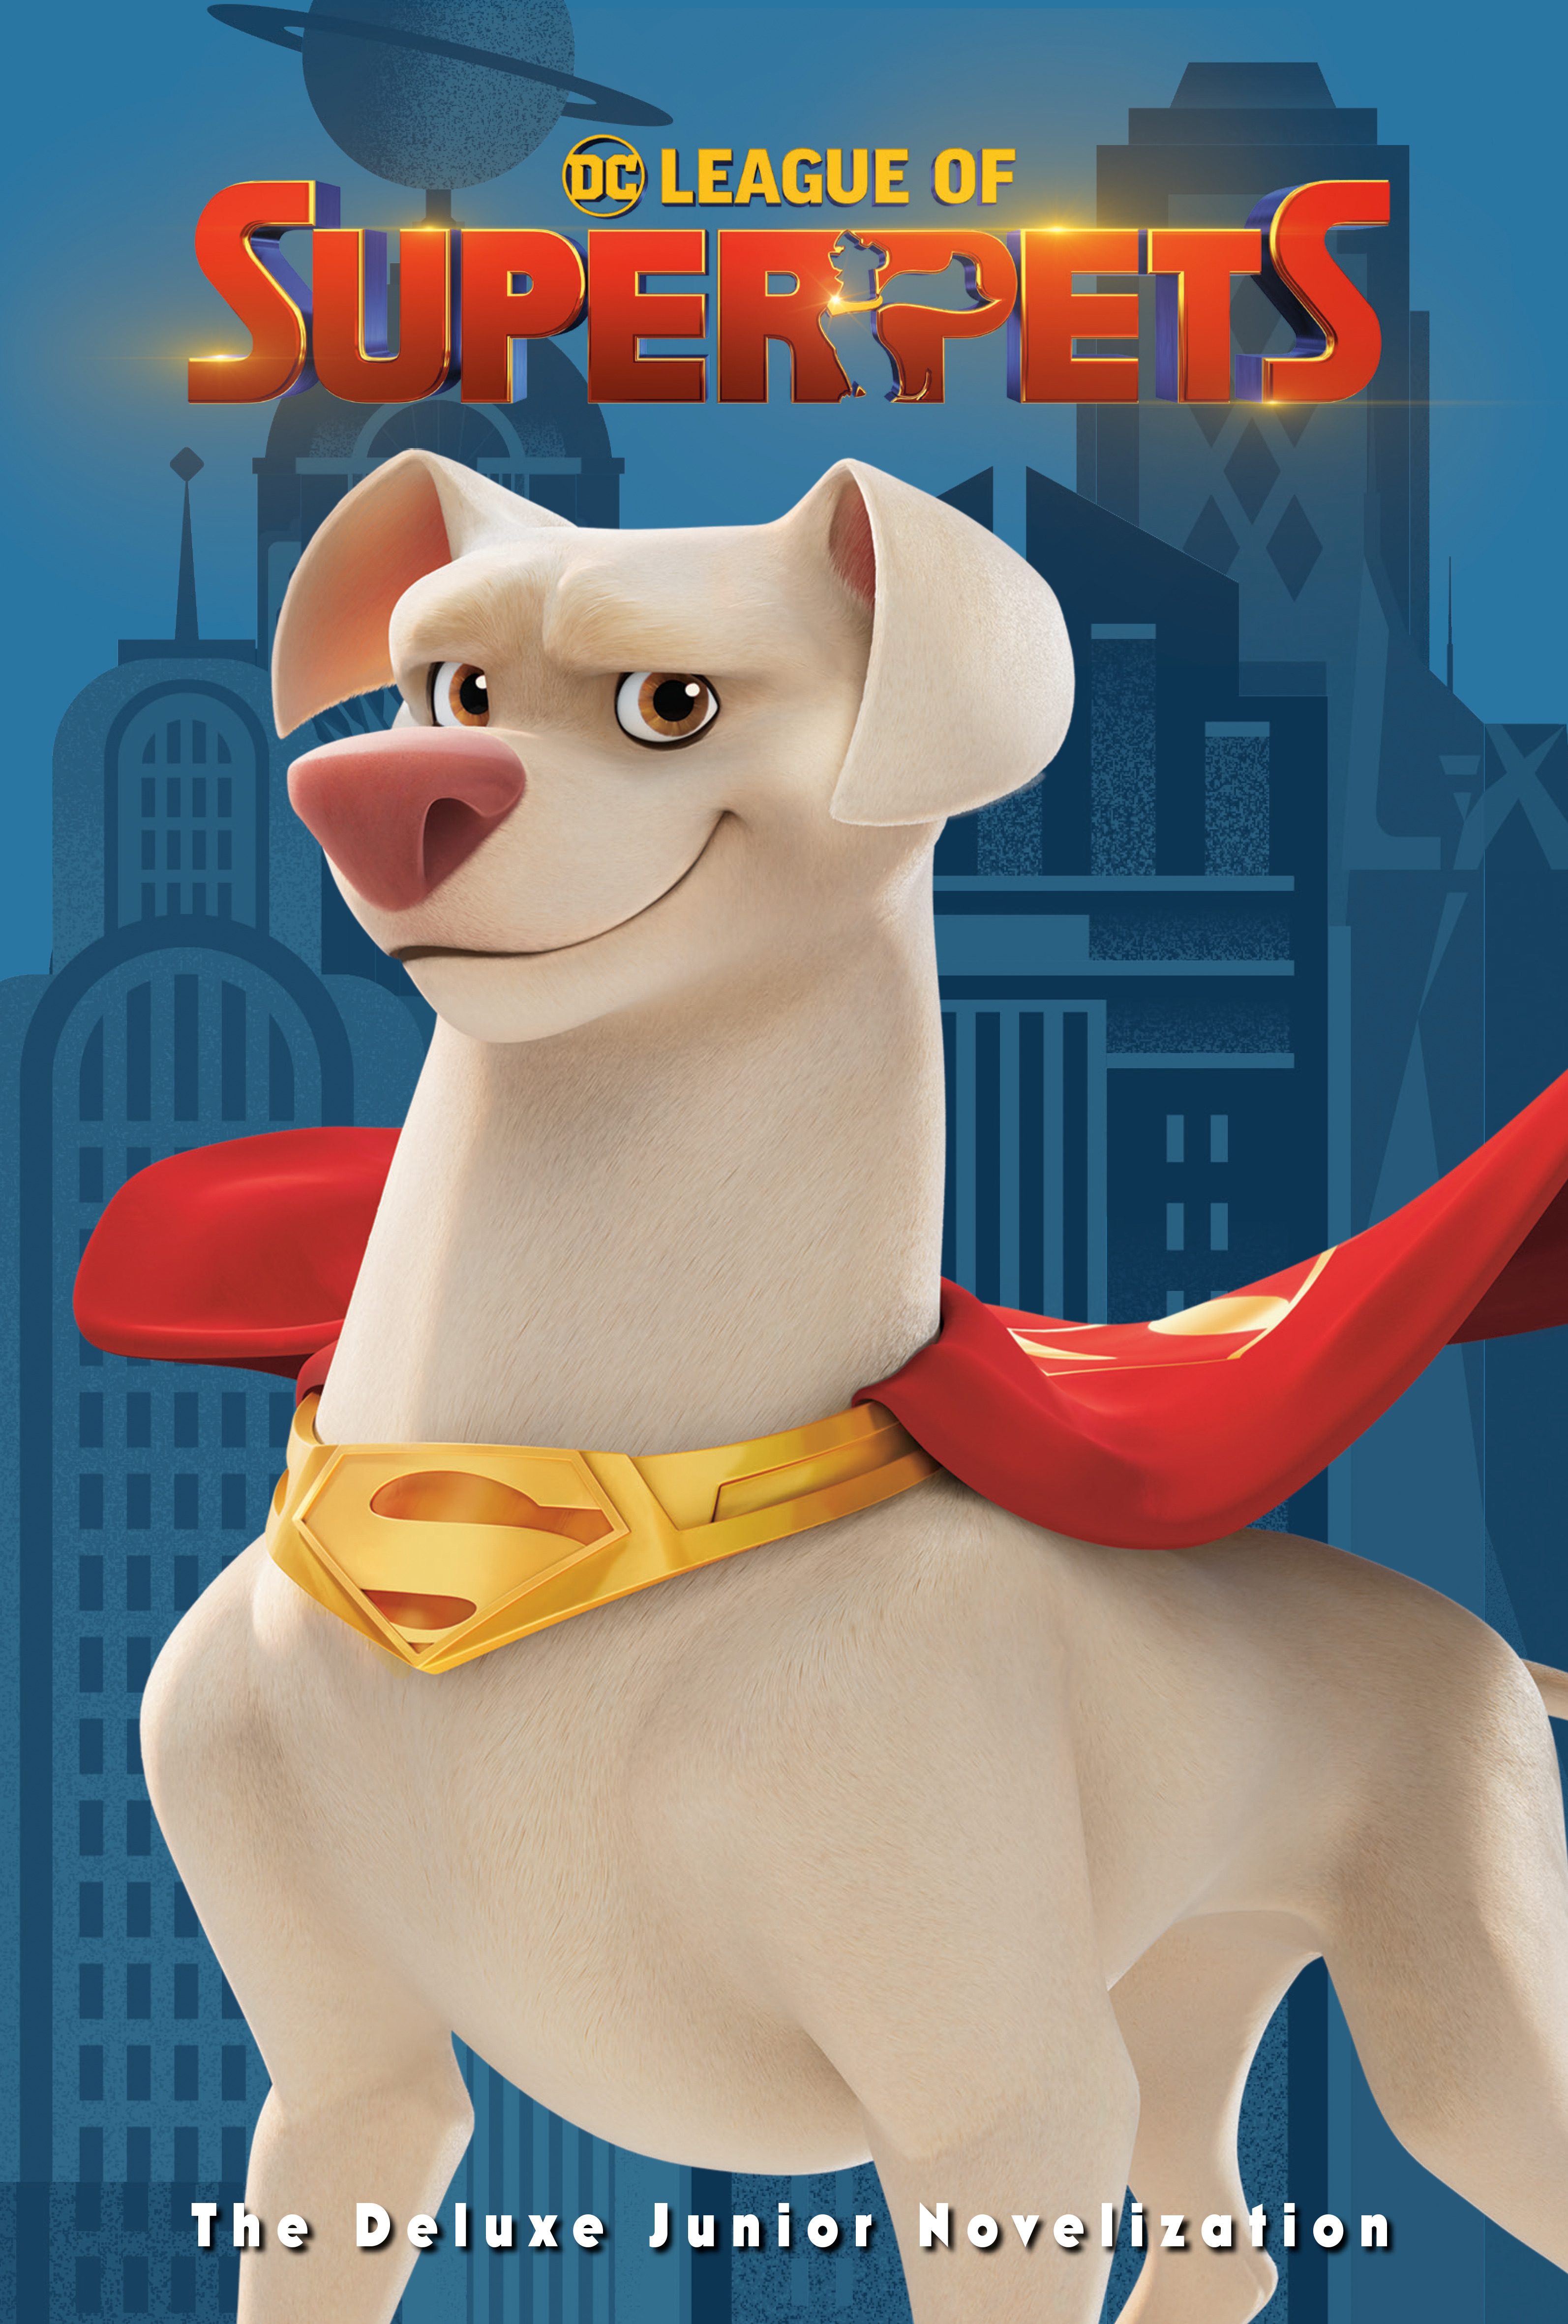 DC League of Super-Pets - The Deluxe Junior Novelization : Includes 8-page full-color insert and poster! | 9-12 years old